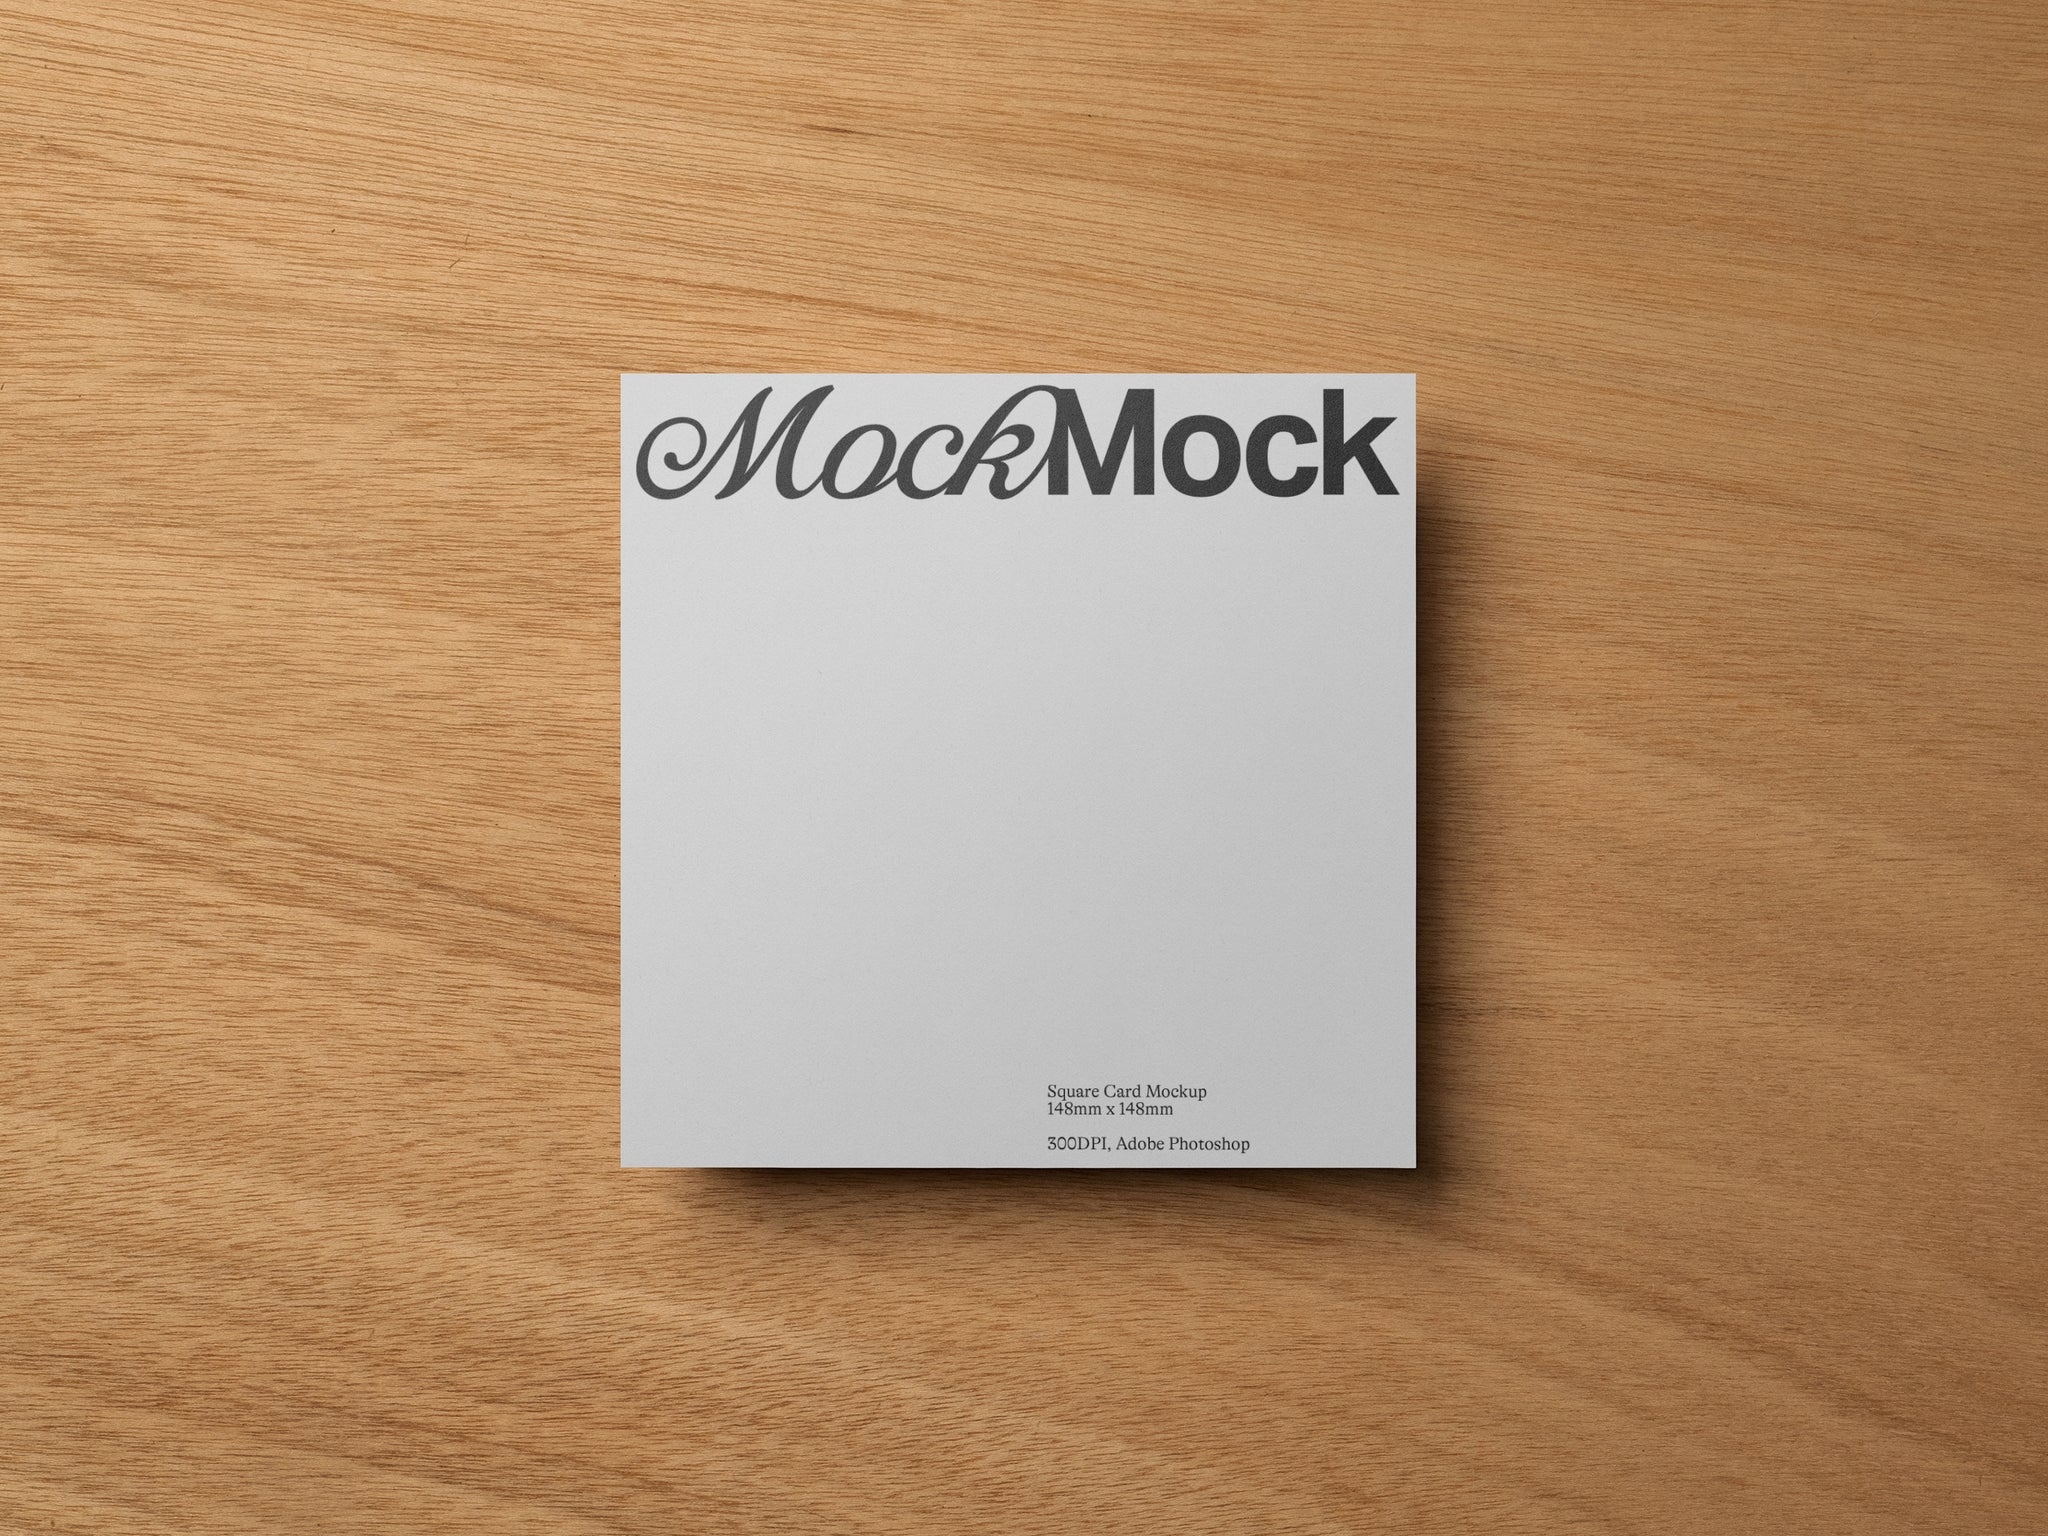 Square Print Mockup on a wooden background